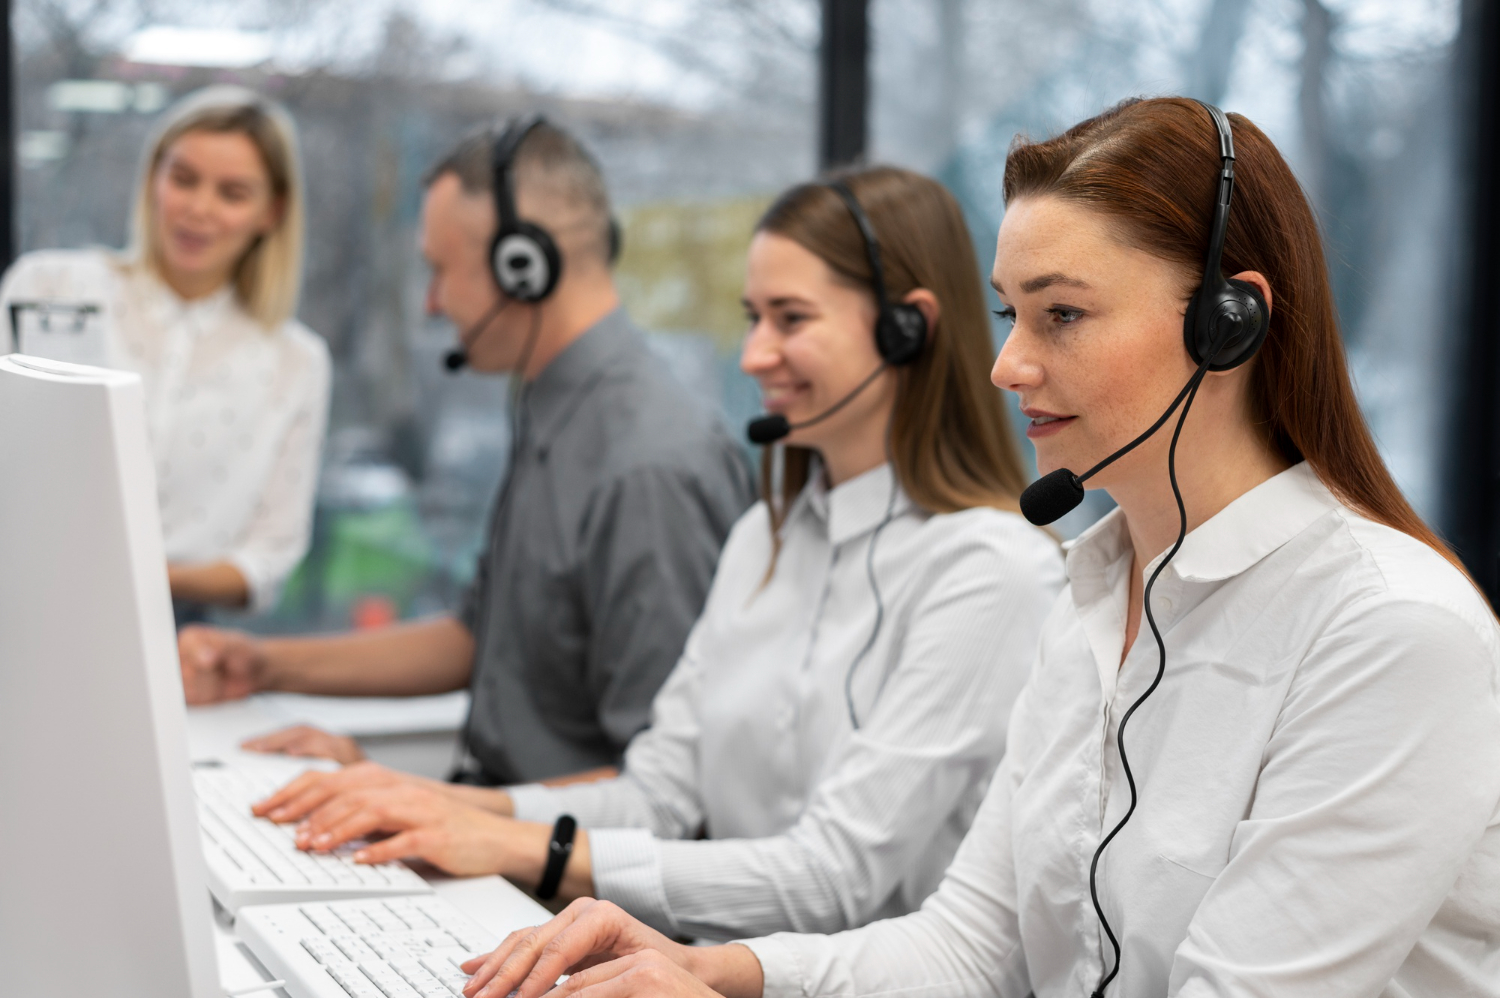 Colleagues working together in a call center with headphones